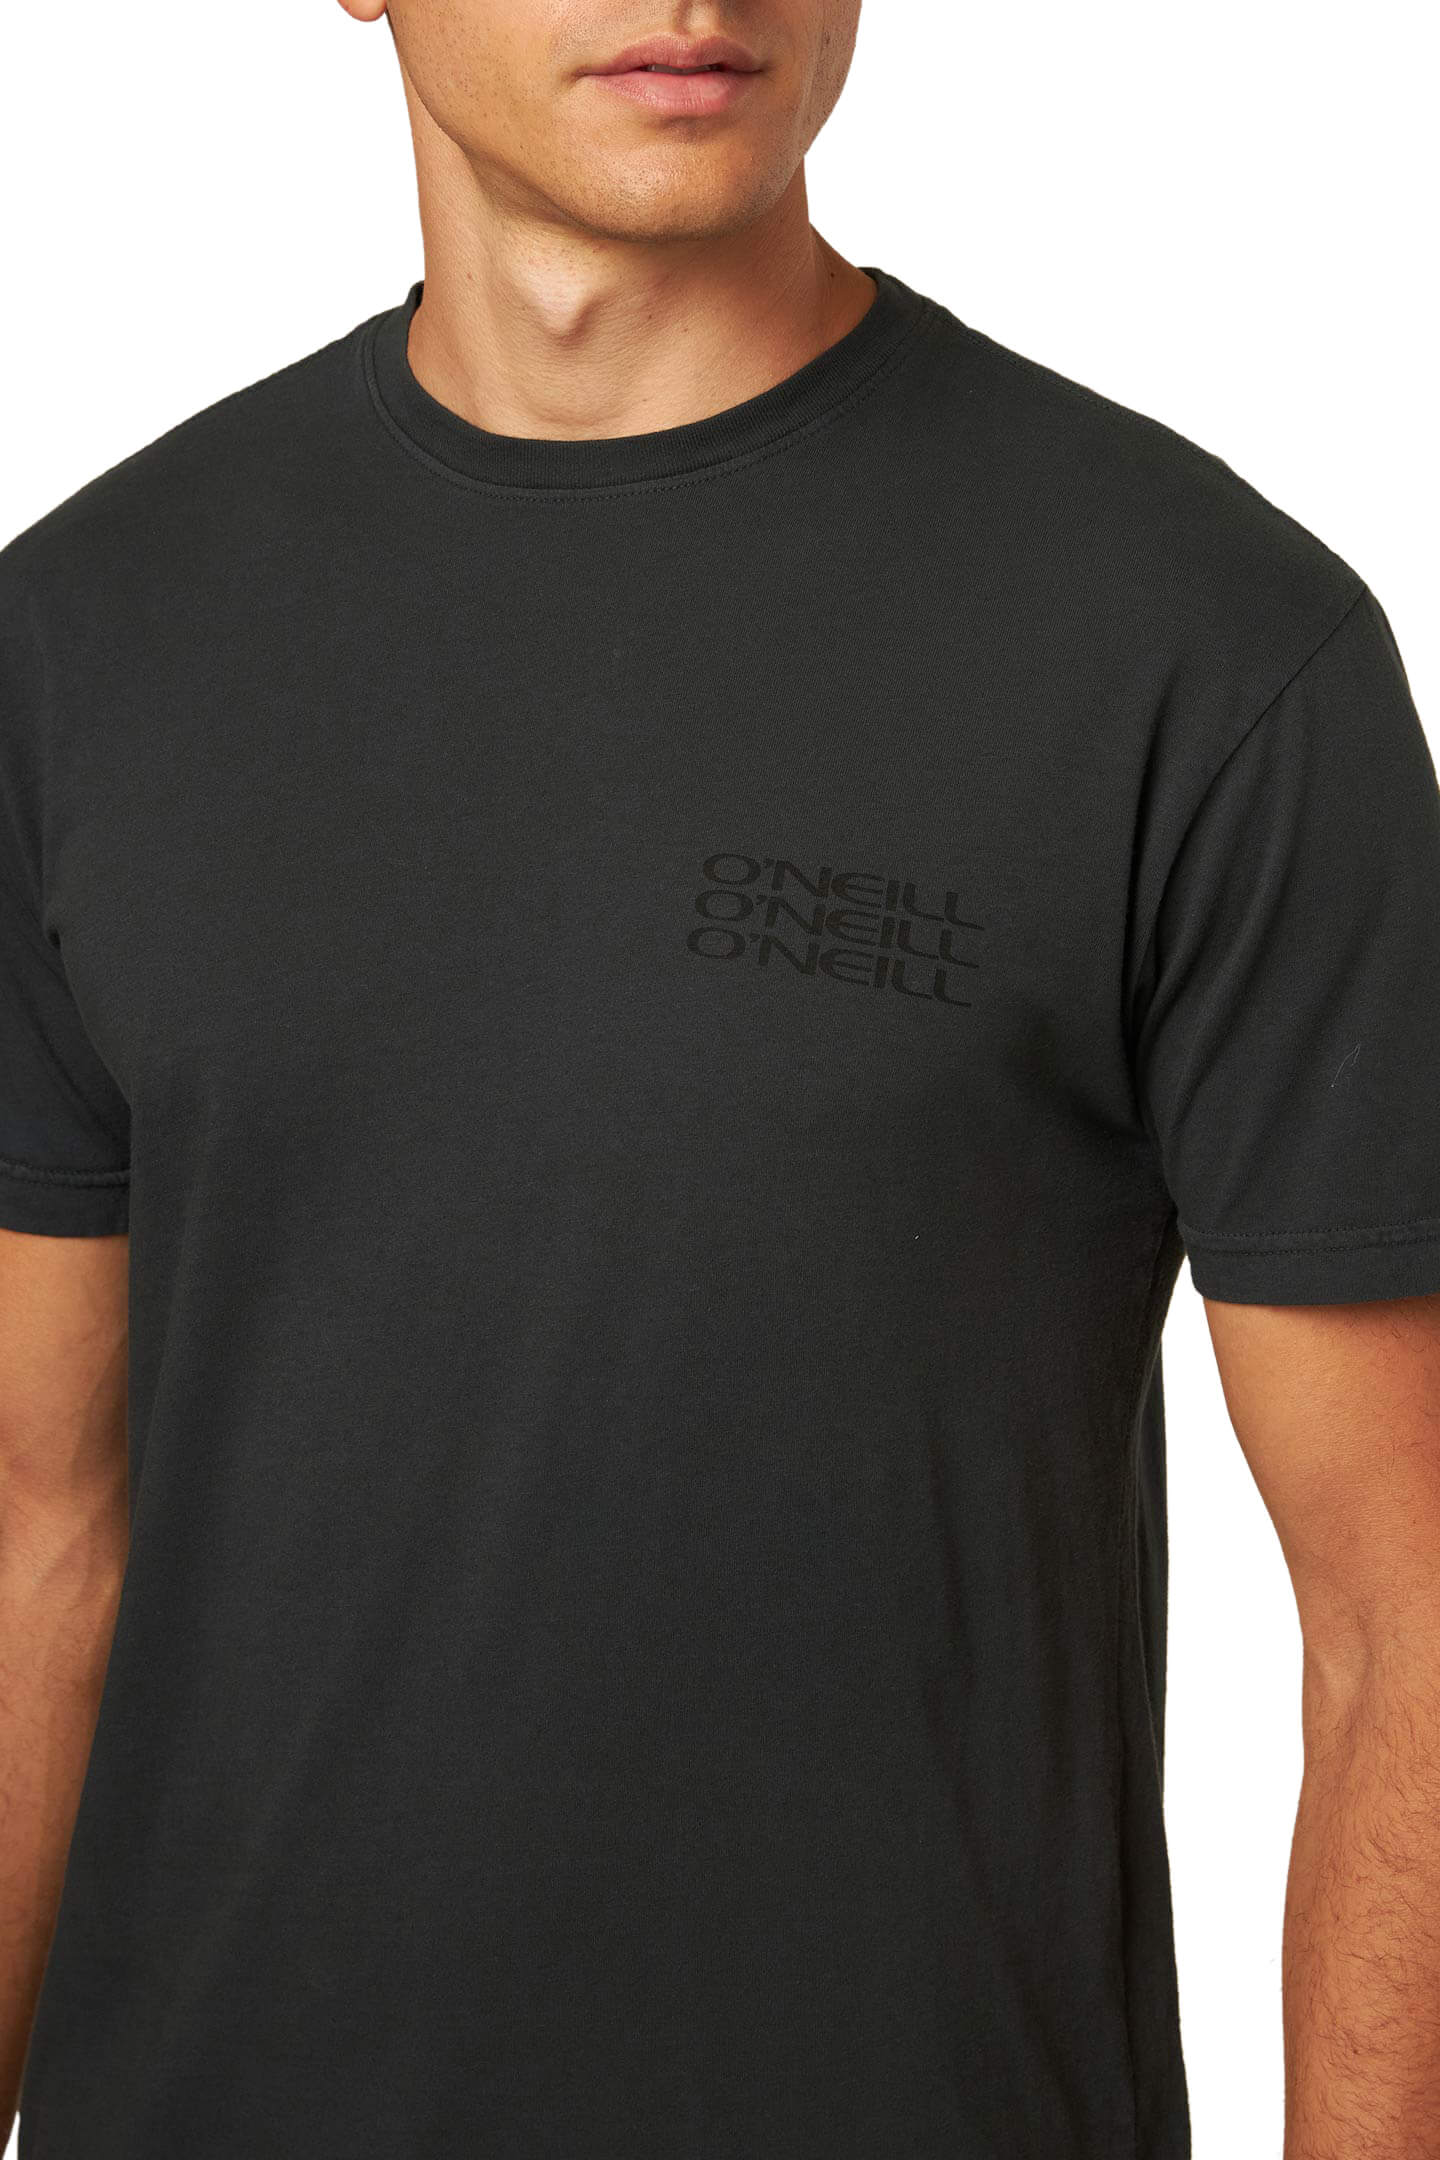 Dont Be Square T-Shirt - Dark Charcoal